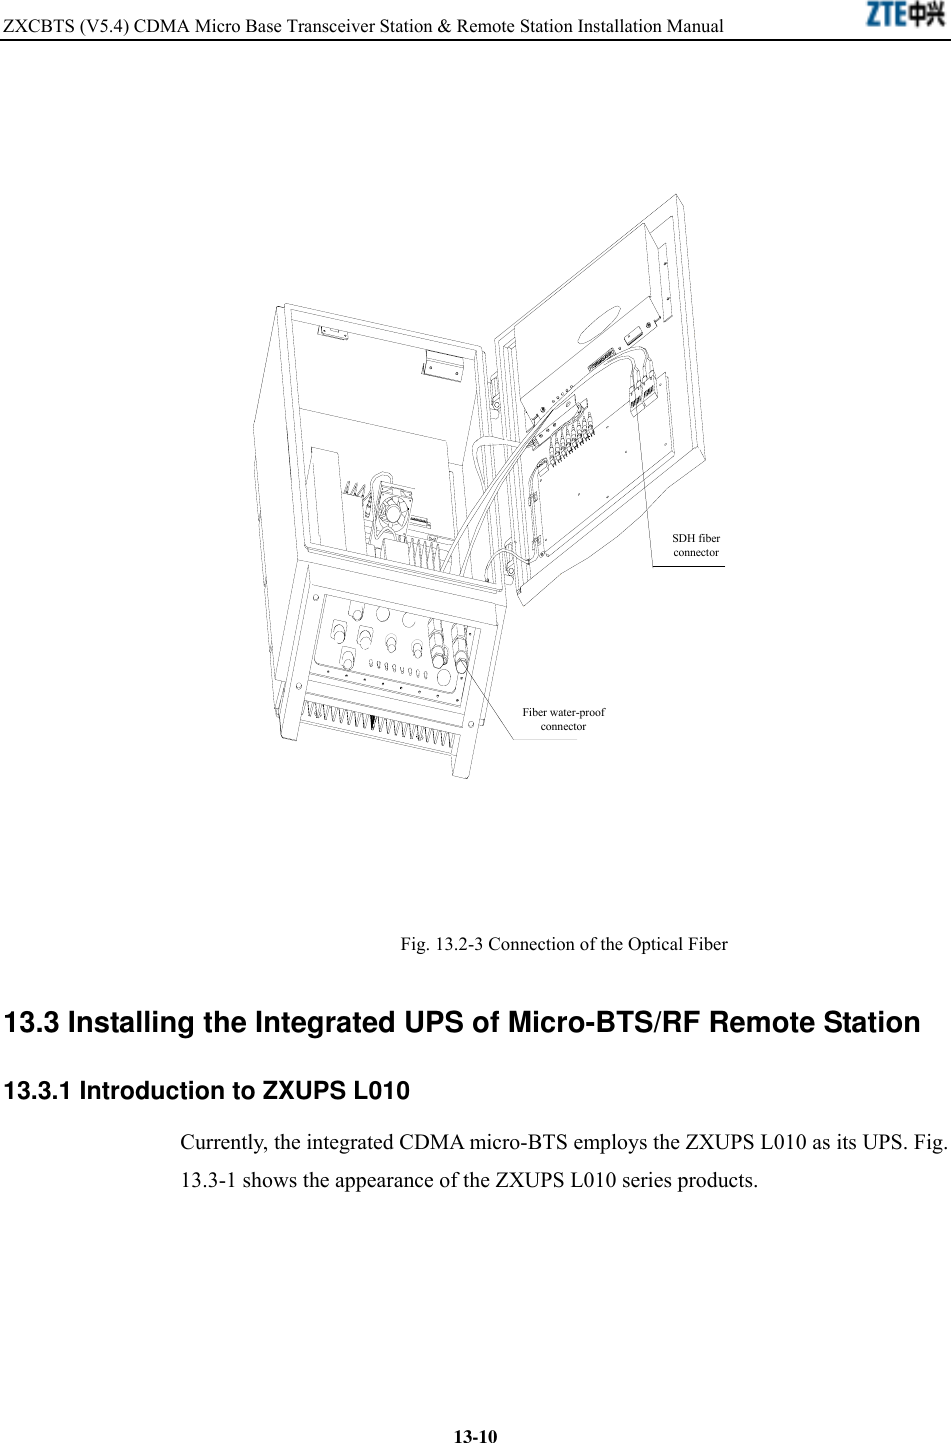 ZXCBTS (V5.4) CDMA Micro Base Transceiver Station &amp; Remote Station Installation Manual    13-10??????SDH?????Fiber water-proofconnectorSDH fiberconnector Fig. 13.2-3 Connection of the Optical Fiber 13.3 Installing the Integrated UPS of Micro-BTS/RF Remote Station 13.3.1 Introduction to ZXUPS L010 Currently, the integrated CDMA micro-BTS employs the ZXUPS L010 as its UPS. Fig. 13.3-1 shows the appearance of the ZXUPS L010 series products.   